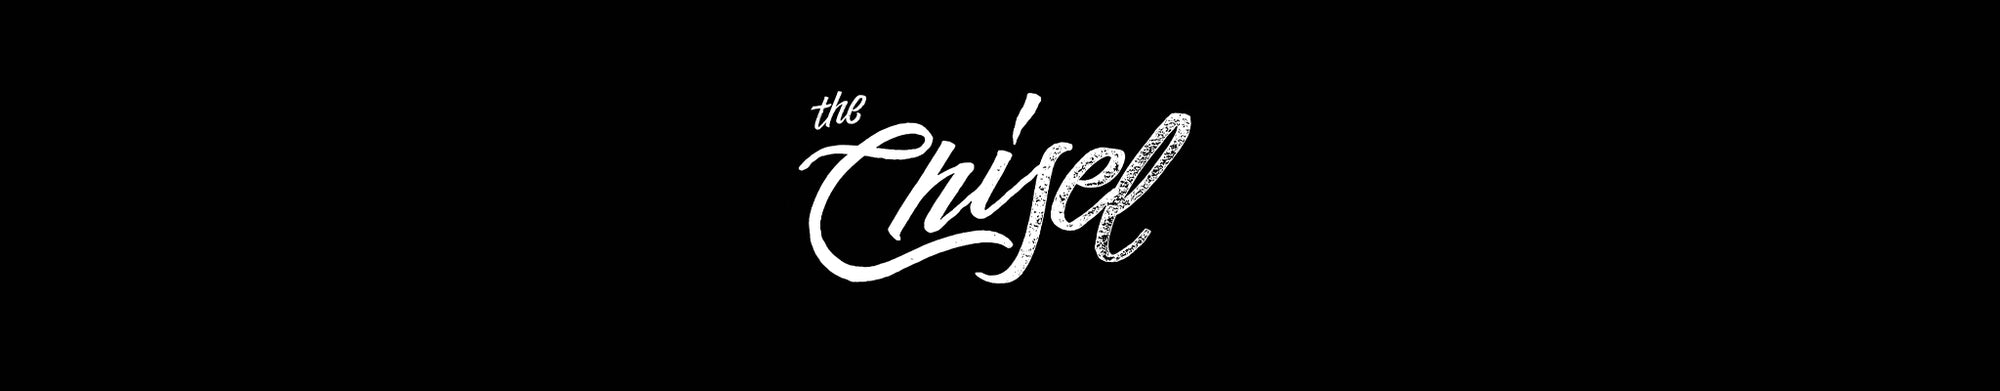 THE CHISEL